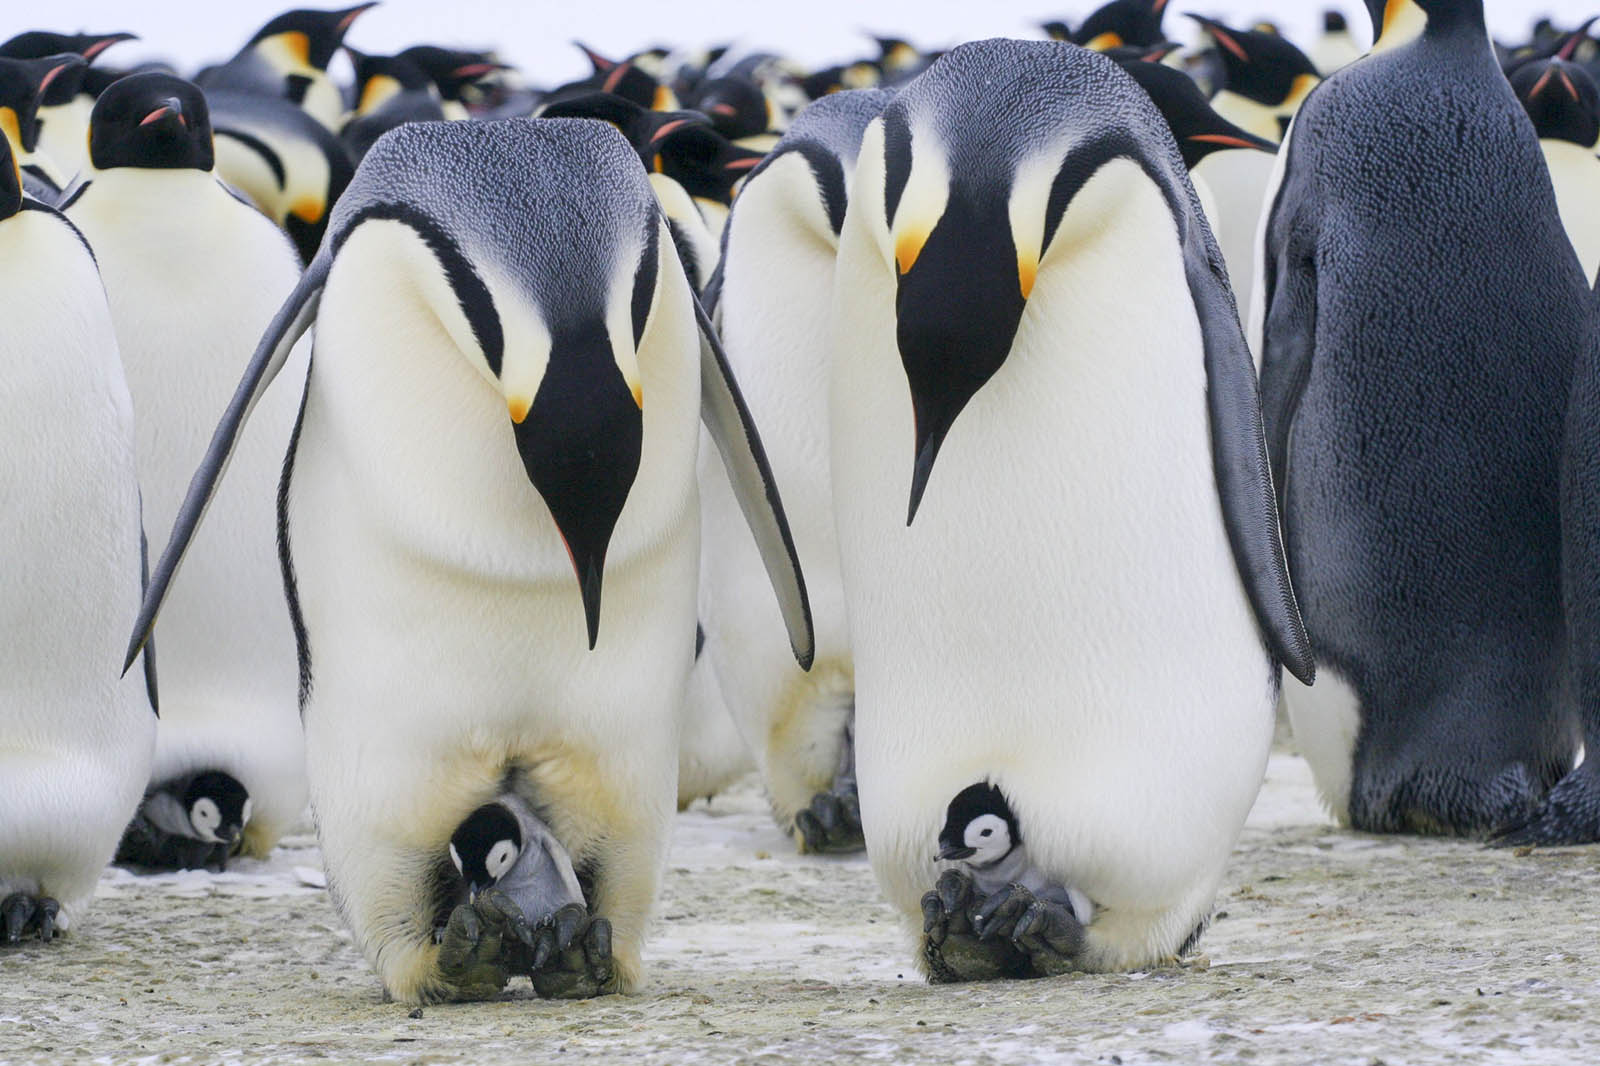 The Average Person Can Score 15/26 on This Trivia Quiz, So to Impress Me, You’ll Have to Score Least 20 Emperor Penguins